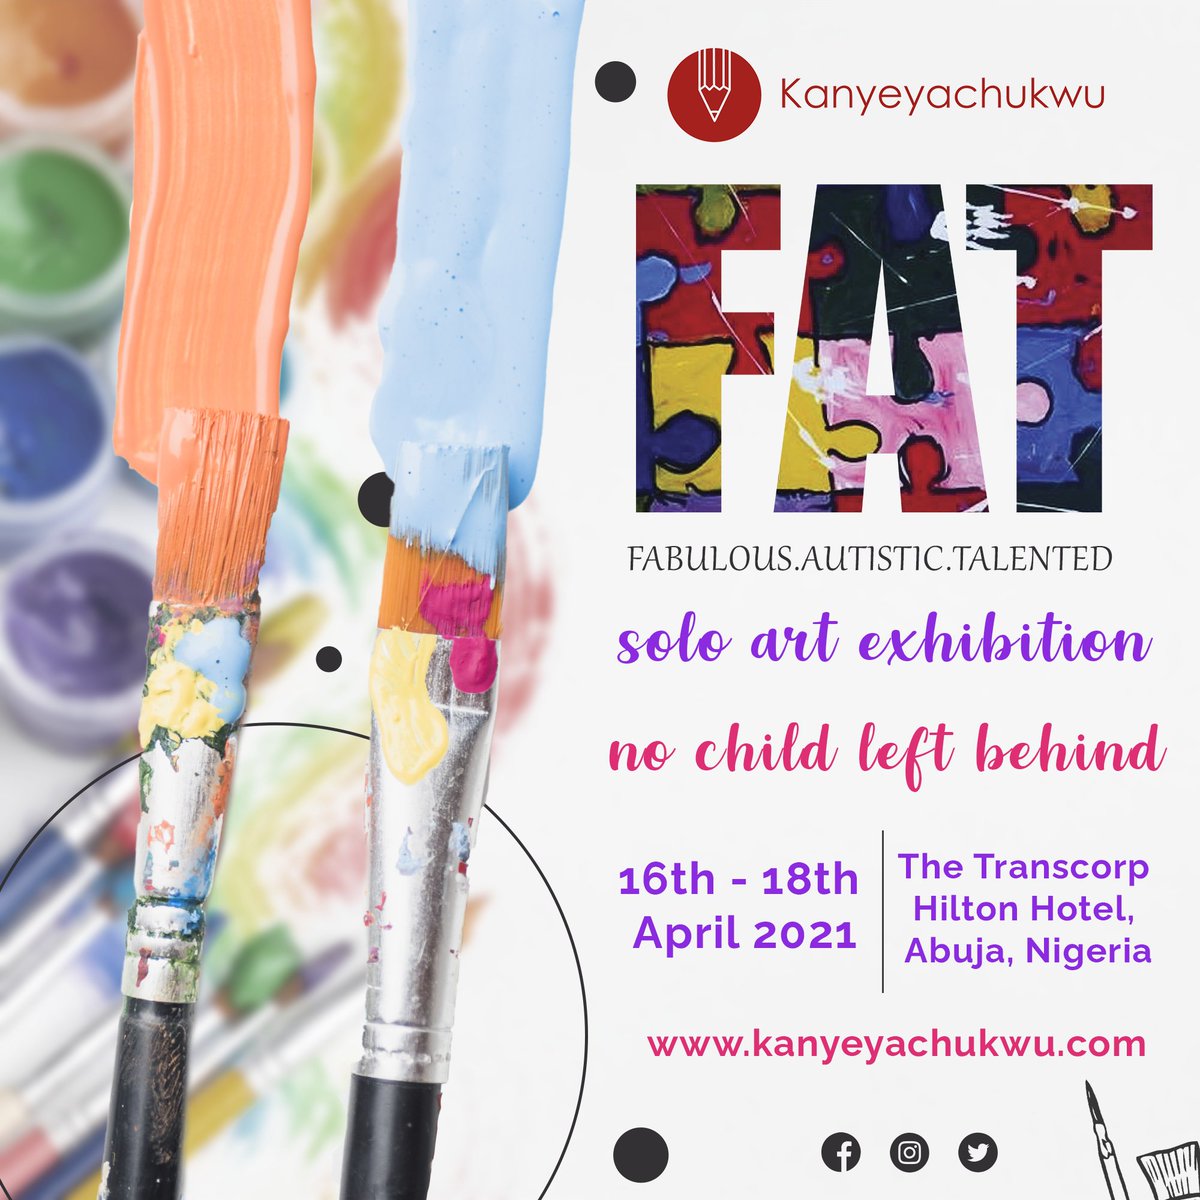 A Solo Art Exhibition at The Transcorp Hilton Hotel Abuja on 16-18 April 2021. To create awareness on the world autism month . Theme is “NO CHILD LEFT BEHIND”. Join us today!

#impossibilityisamyth #artistthoughts #artist #arrtpassion #artlovers #soloartexhibition #artexhibition